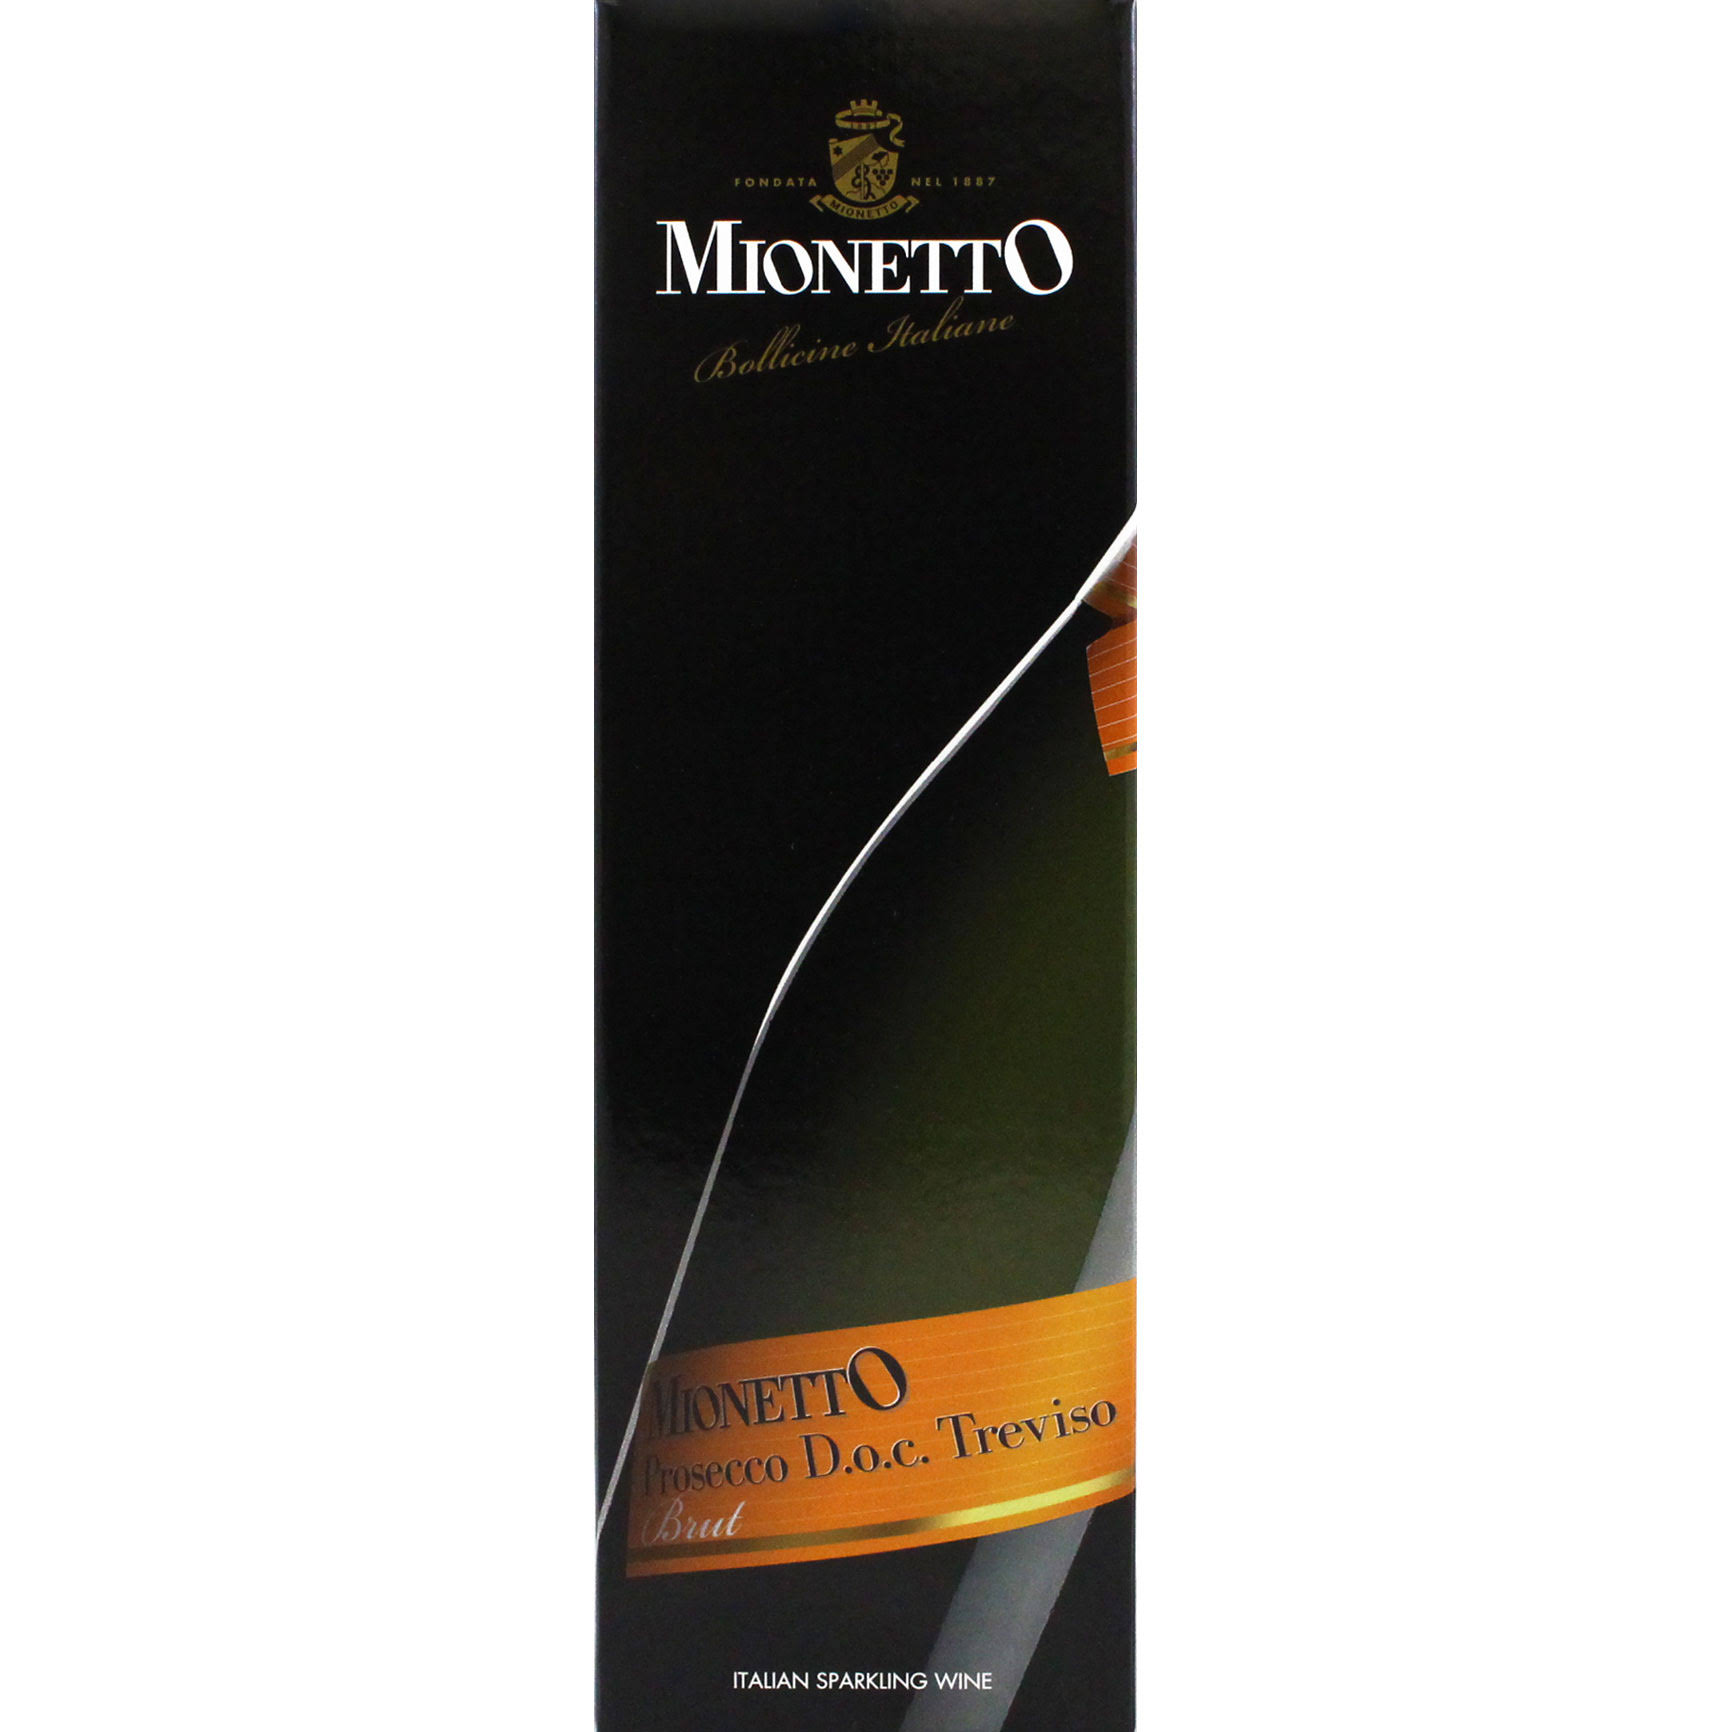 Mionetto Prosecco Brut, Italy (Vintage Varies) - 750 ml bottle